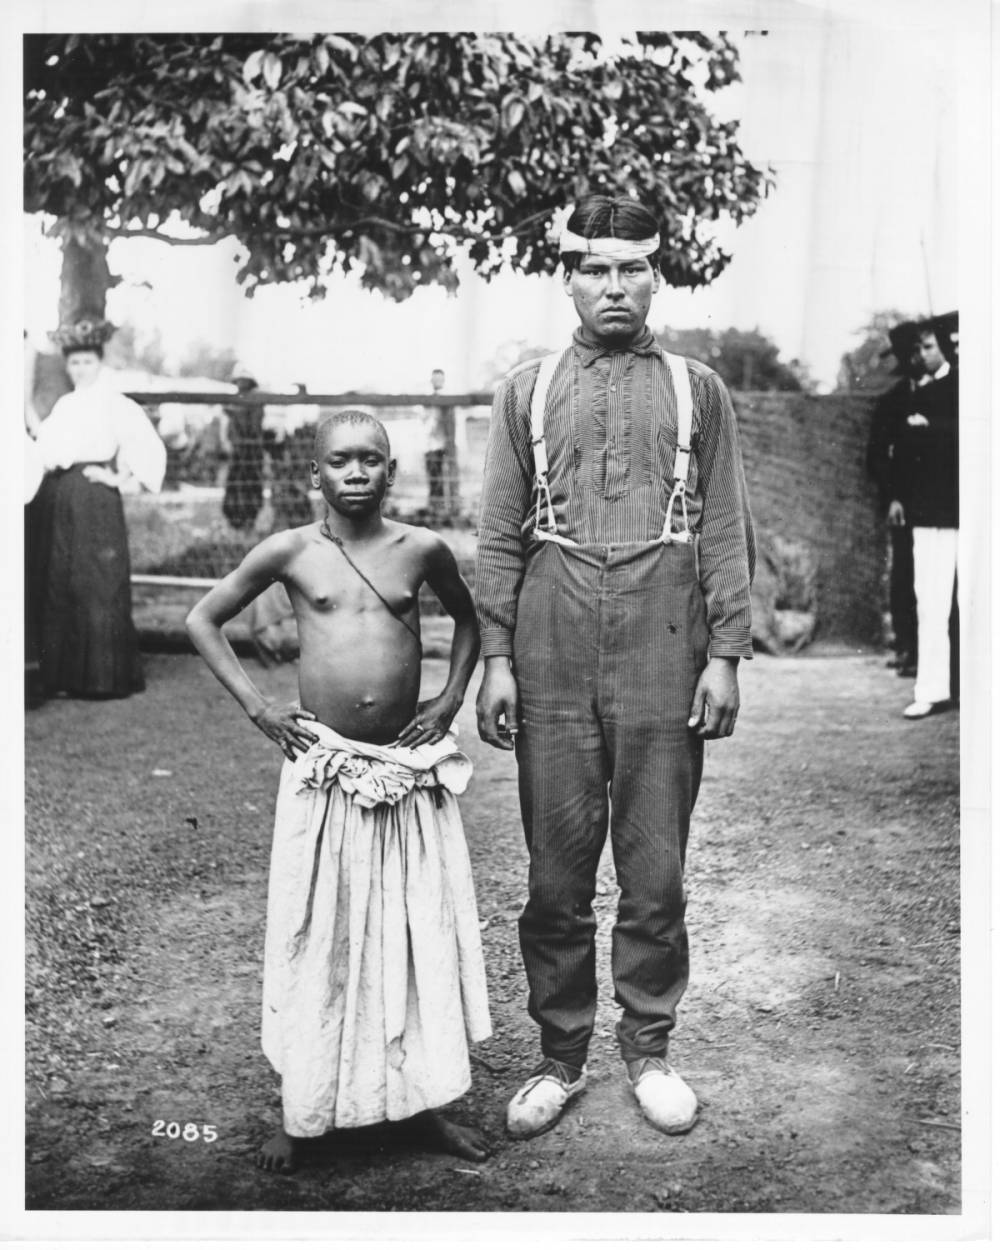 <p>Most sources contemporary to the Louisiana Purchase Exposition identified the men brought from the Congo Free State for the fair as pygmies, although the Africans came from a number of ethnic groups. Heights compared: The photograph shows the African man, at about four and a half feet, standing next to the Patagonian Indian, at about six feet. Number 2085: Number ‘2085’ written in left-hand corner of photograph.</p>
